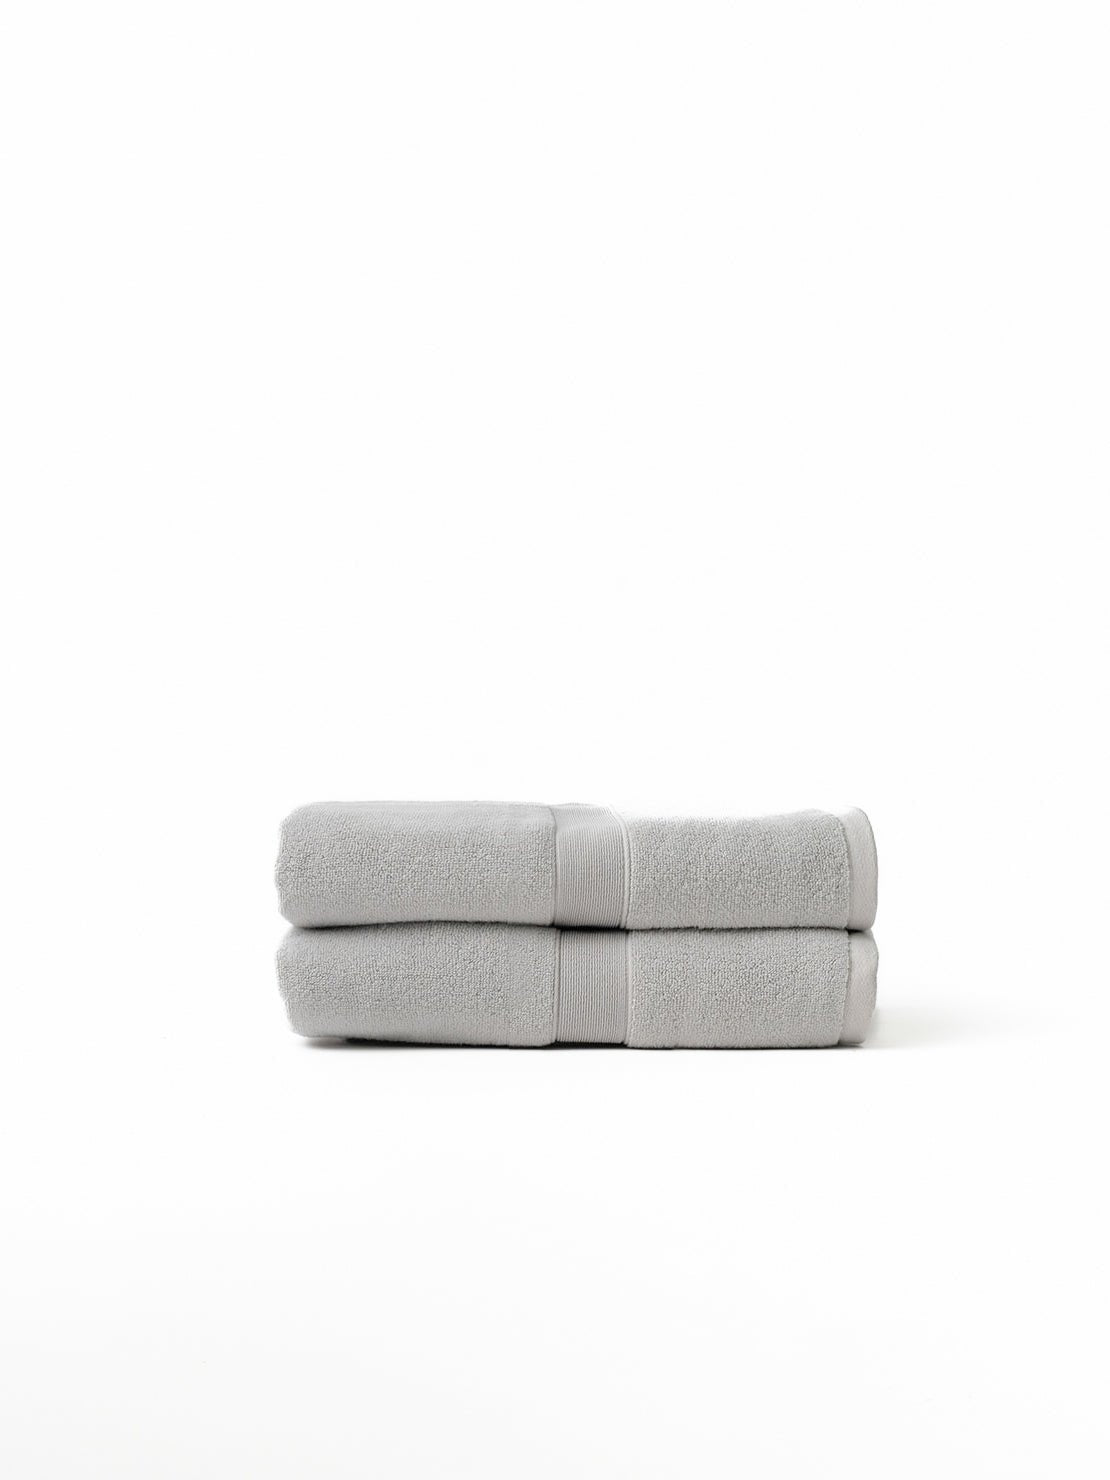 Two luxe bath sheets folded with white background |Color:Light Grey